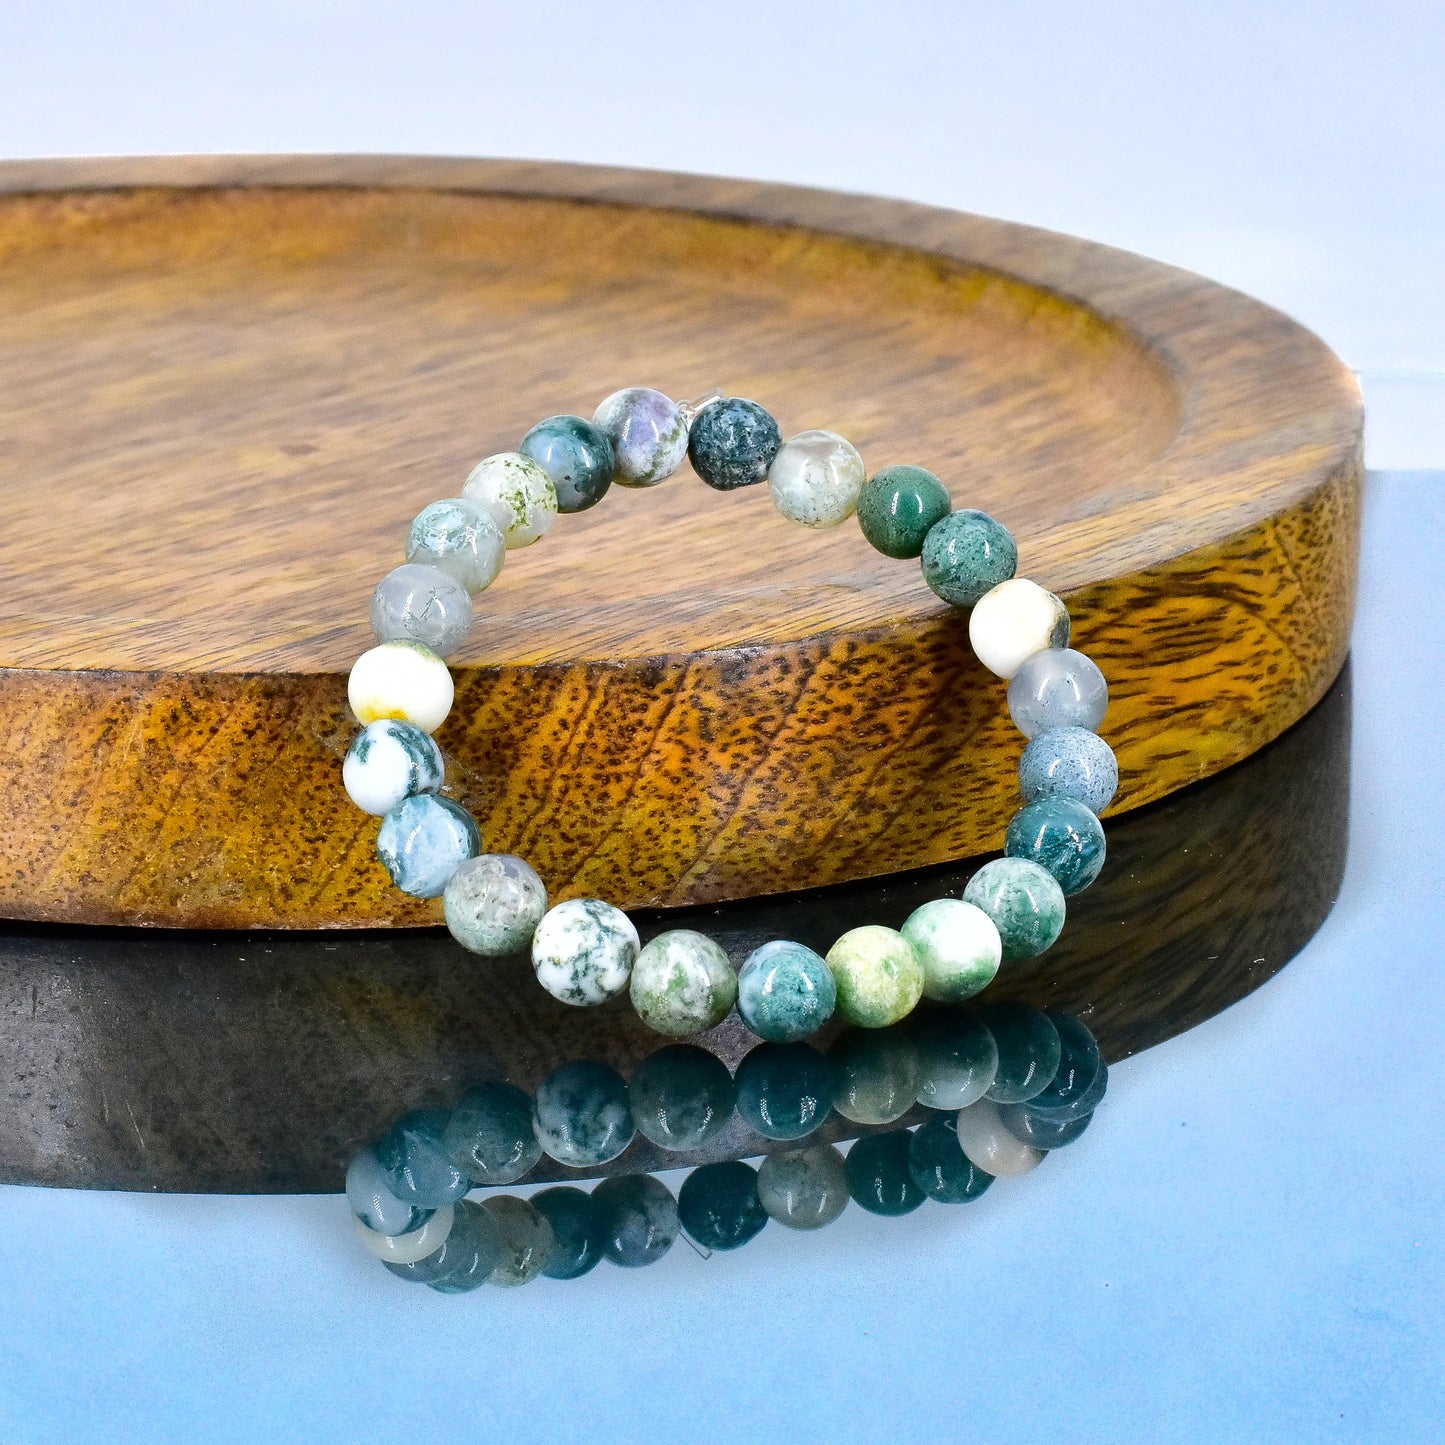 Tree Agate Green Crystal Stone Bracelet for Peace